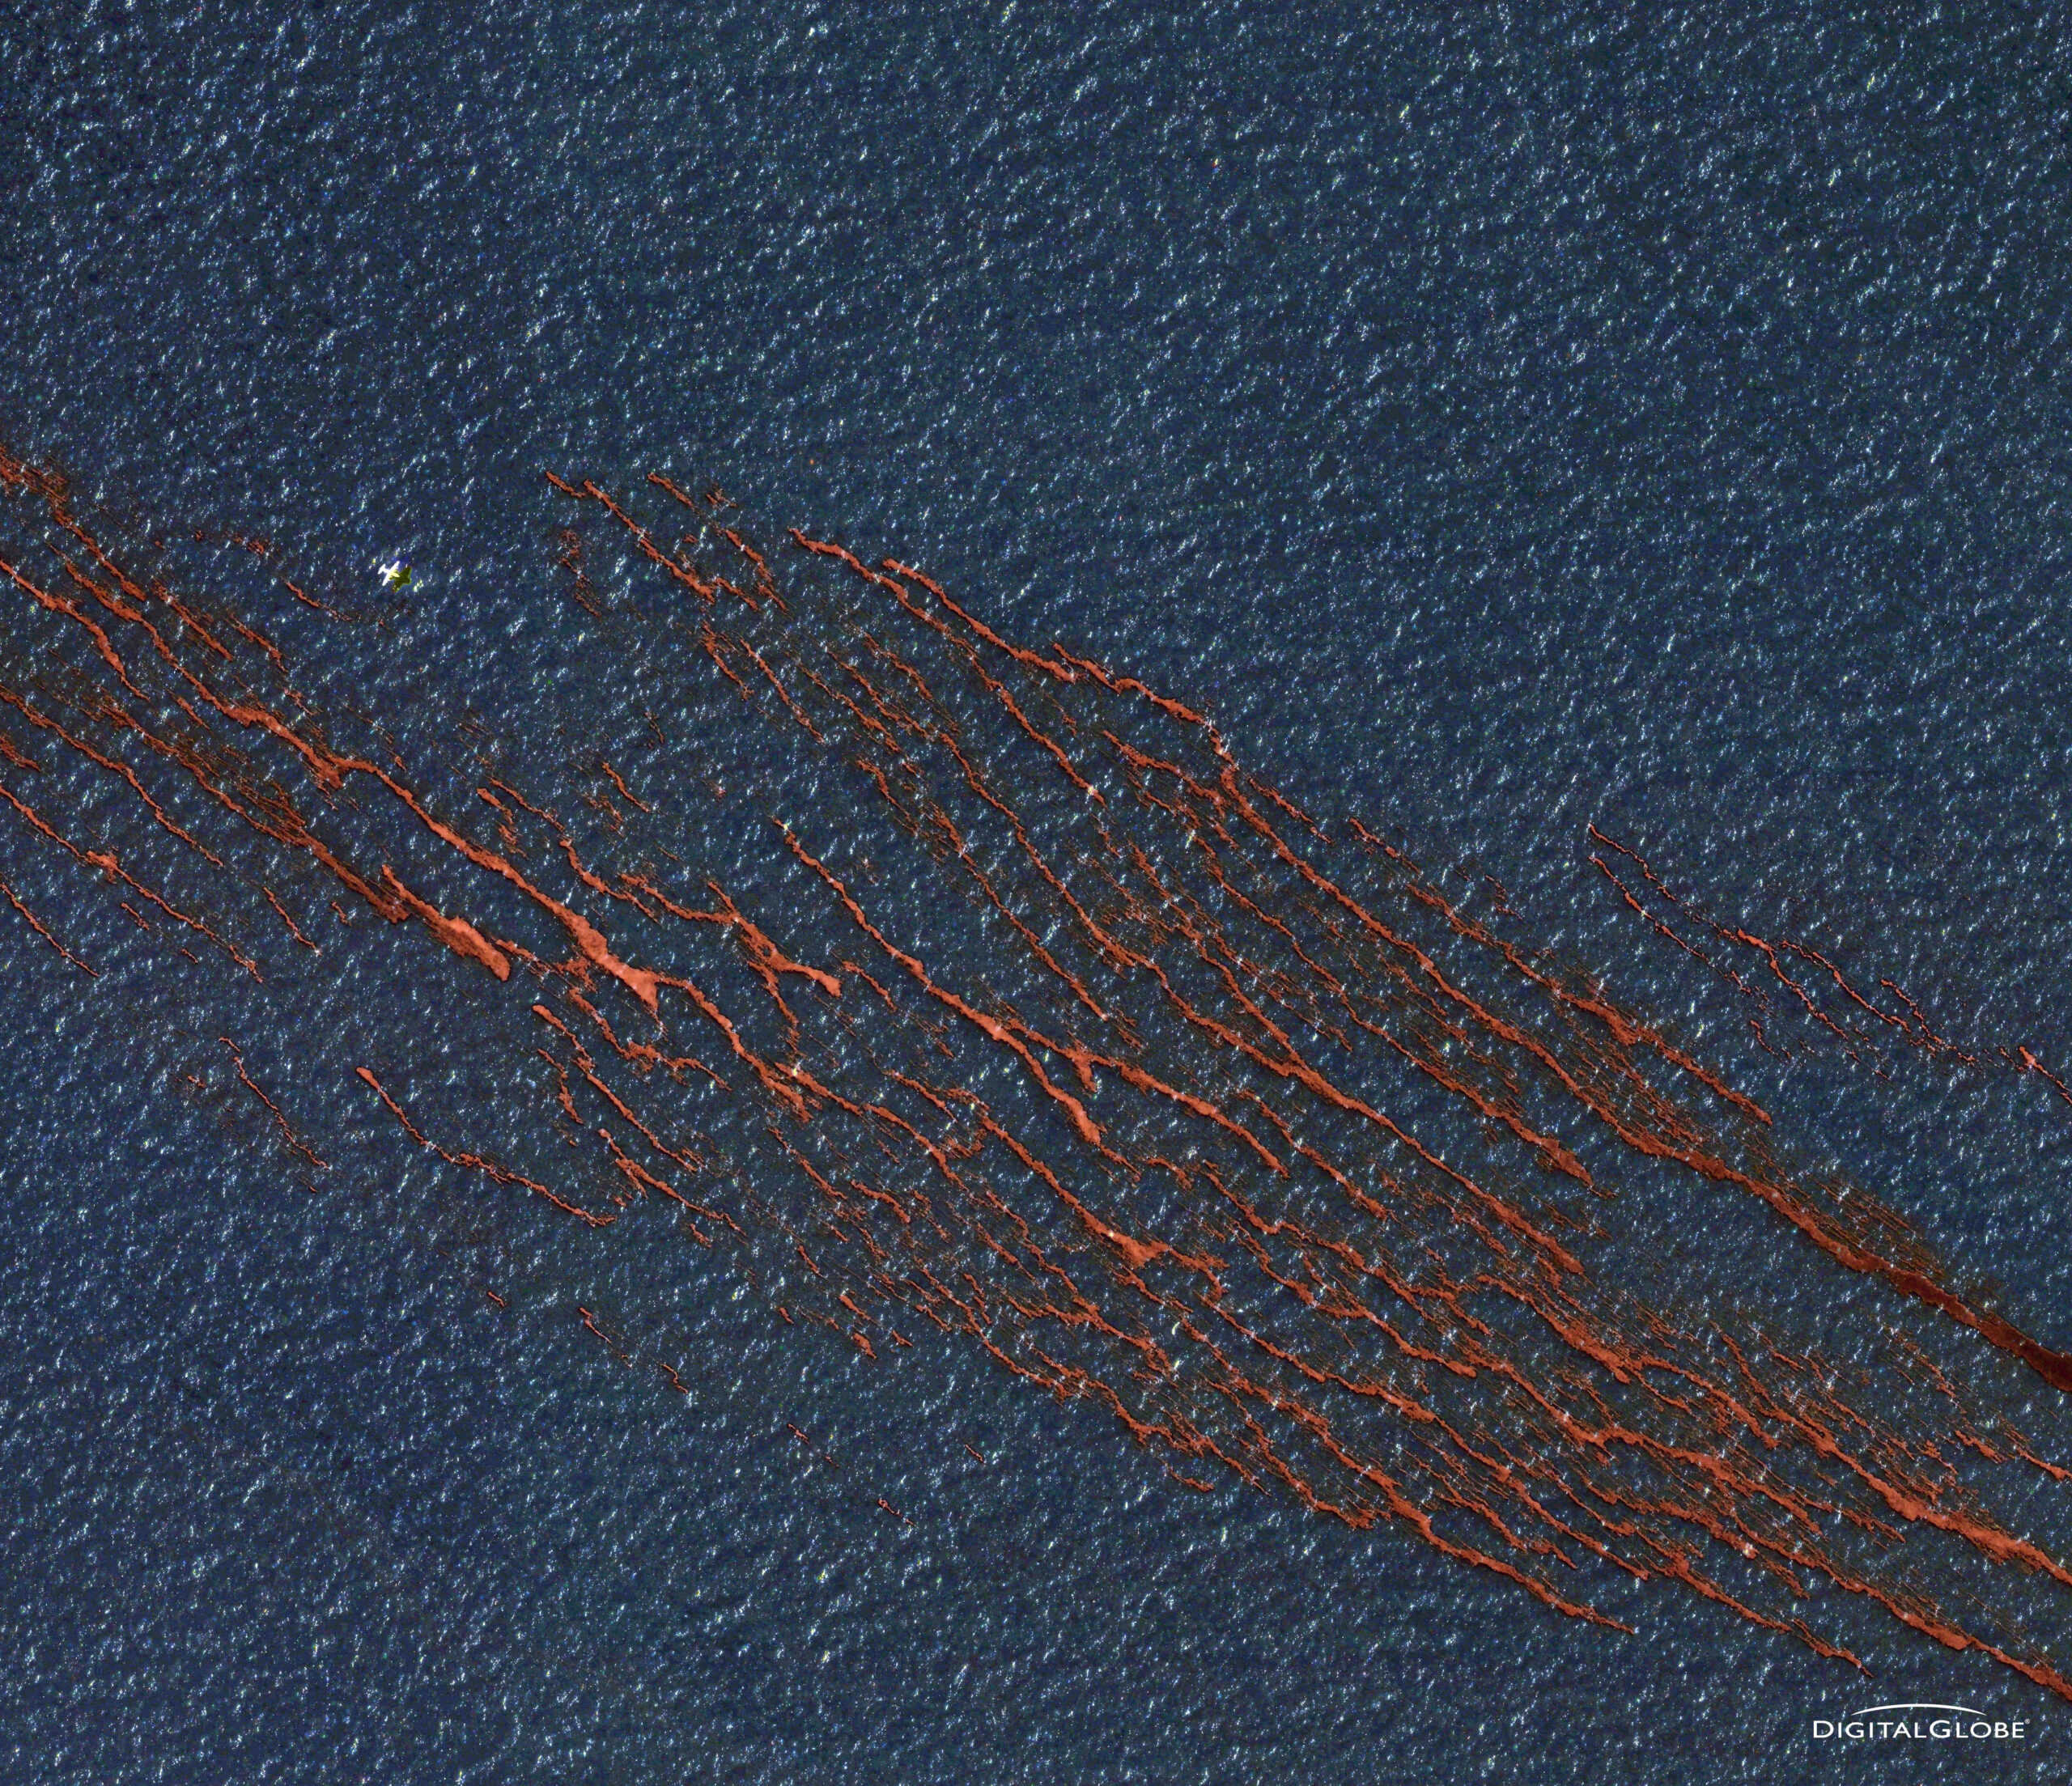 Transocean Deepwater Horizon Drilling Oil Slick, Gulf of Mexico, USA-April 26, 2010: This is a satellite image of the oil spilled and associated clean up caused after an explosion at the Transocean Deepwater Horizon Drilling Slick in the Gulf of Mexico. (credit: DigitalGlobe)